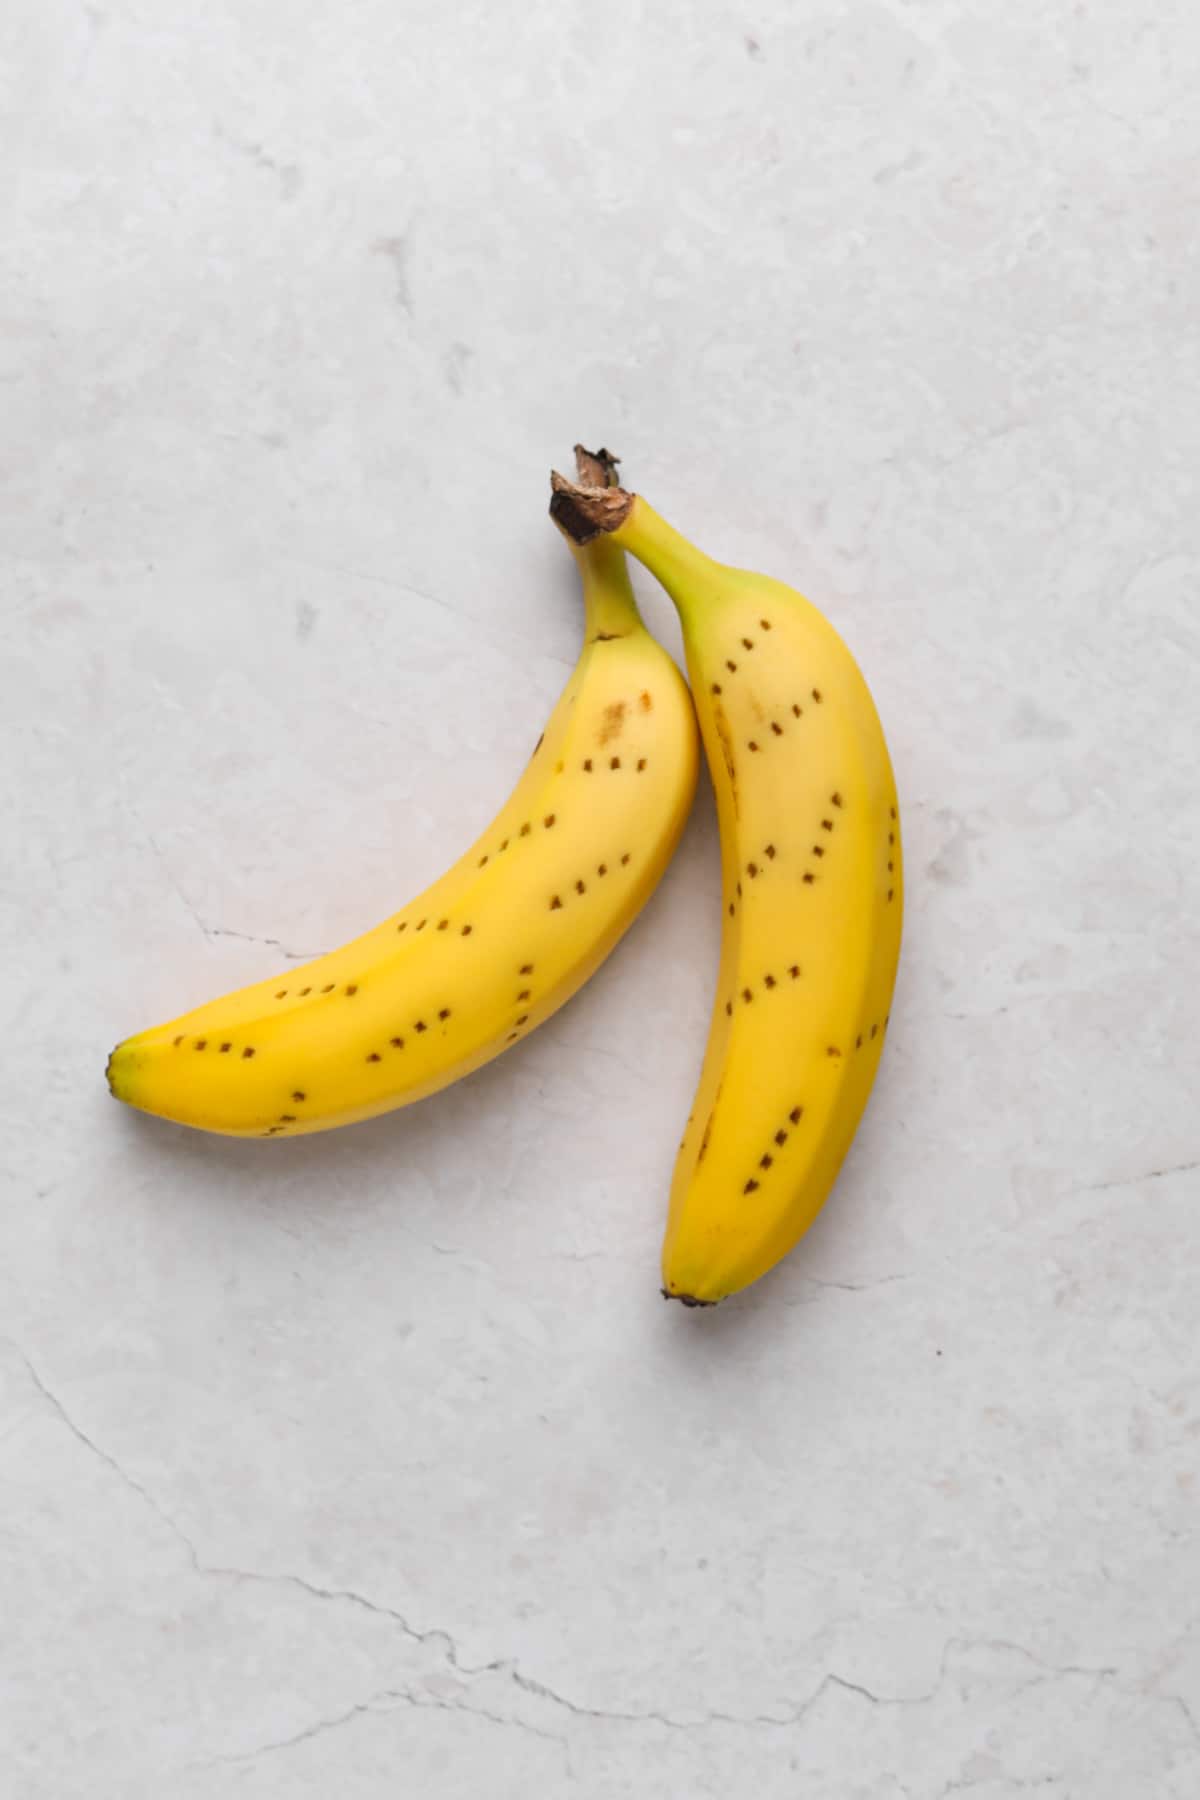 Two yellow bananas on a flat surface with pricked fork holes all over.